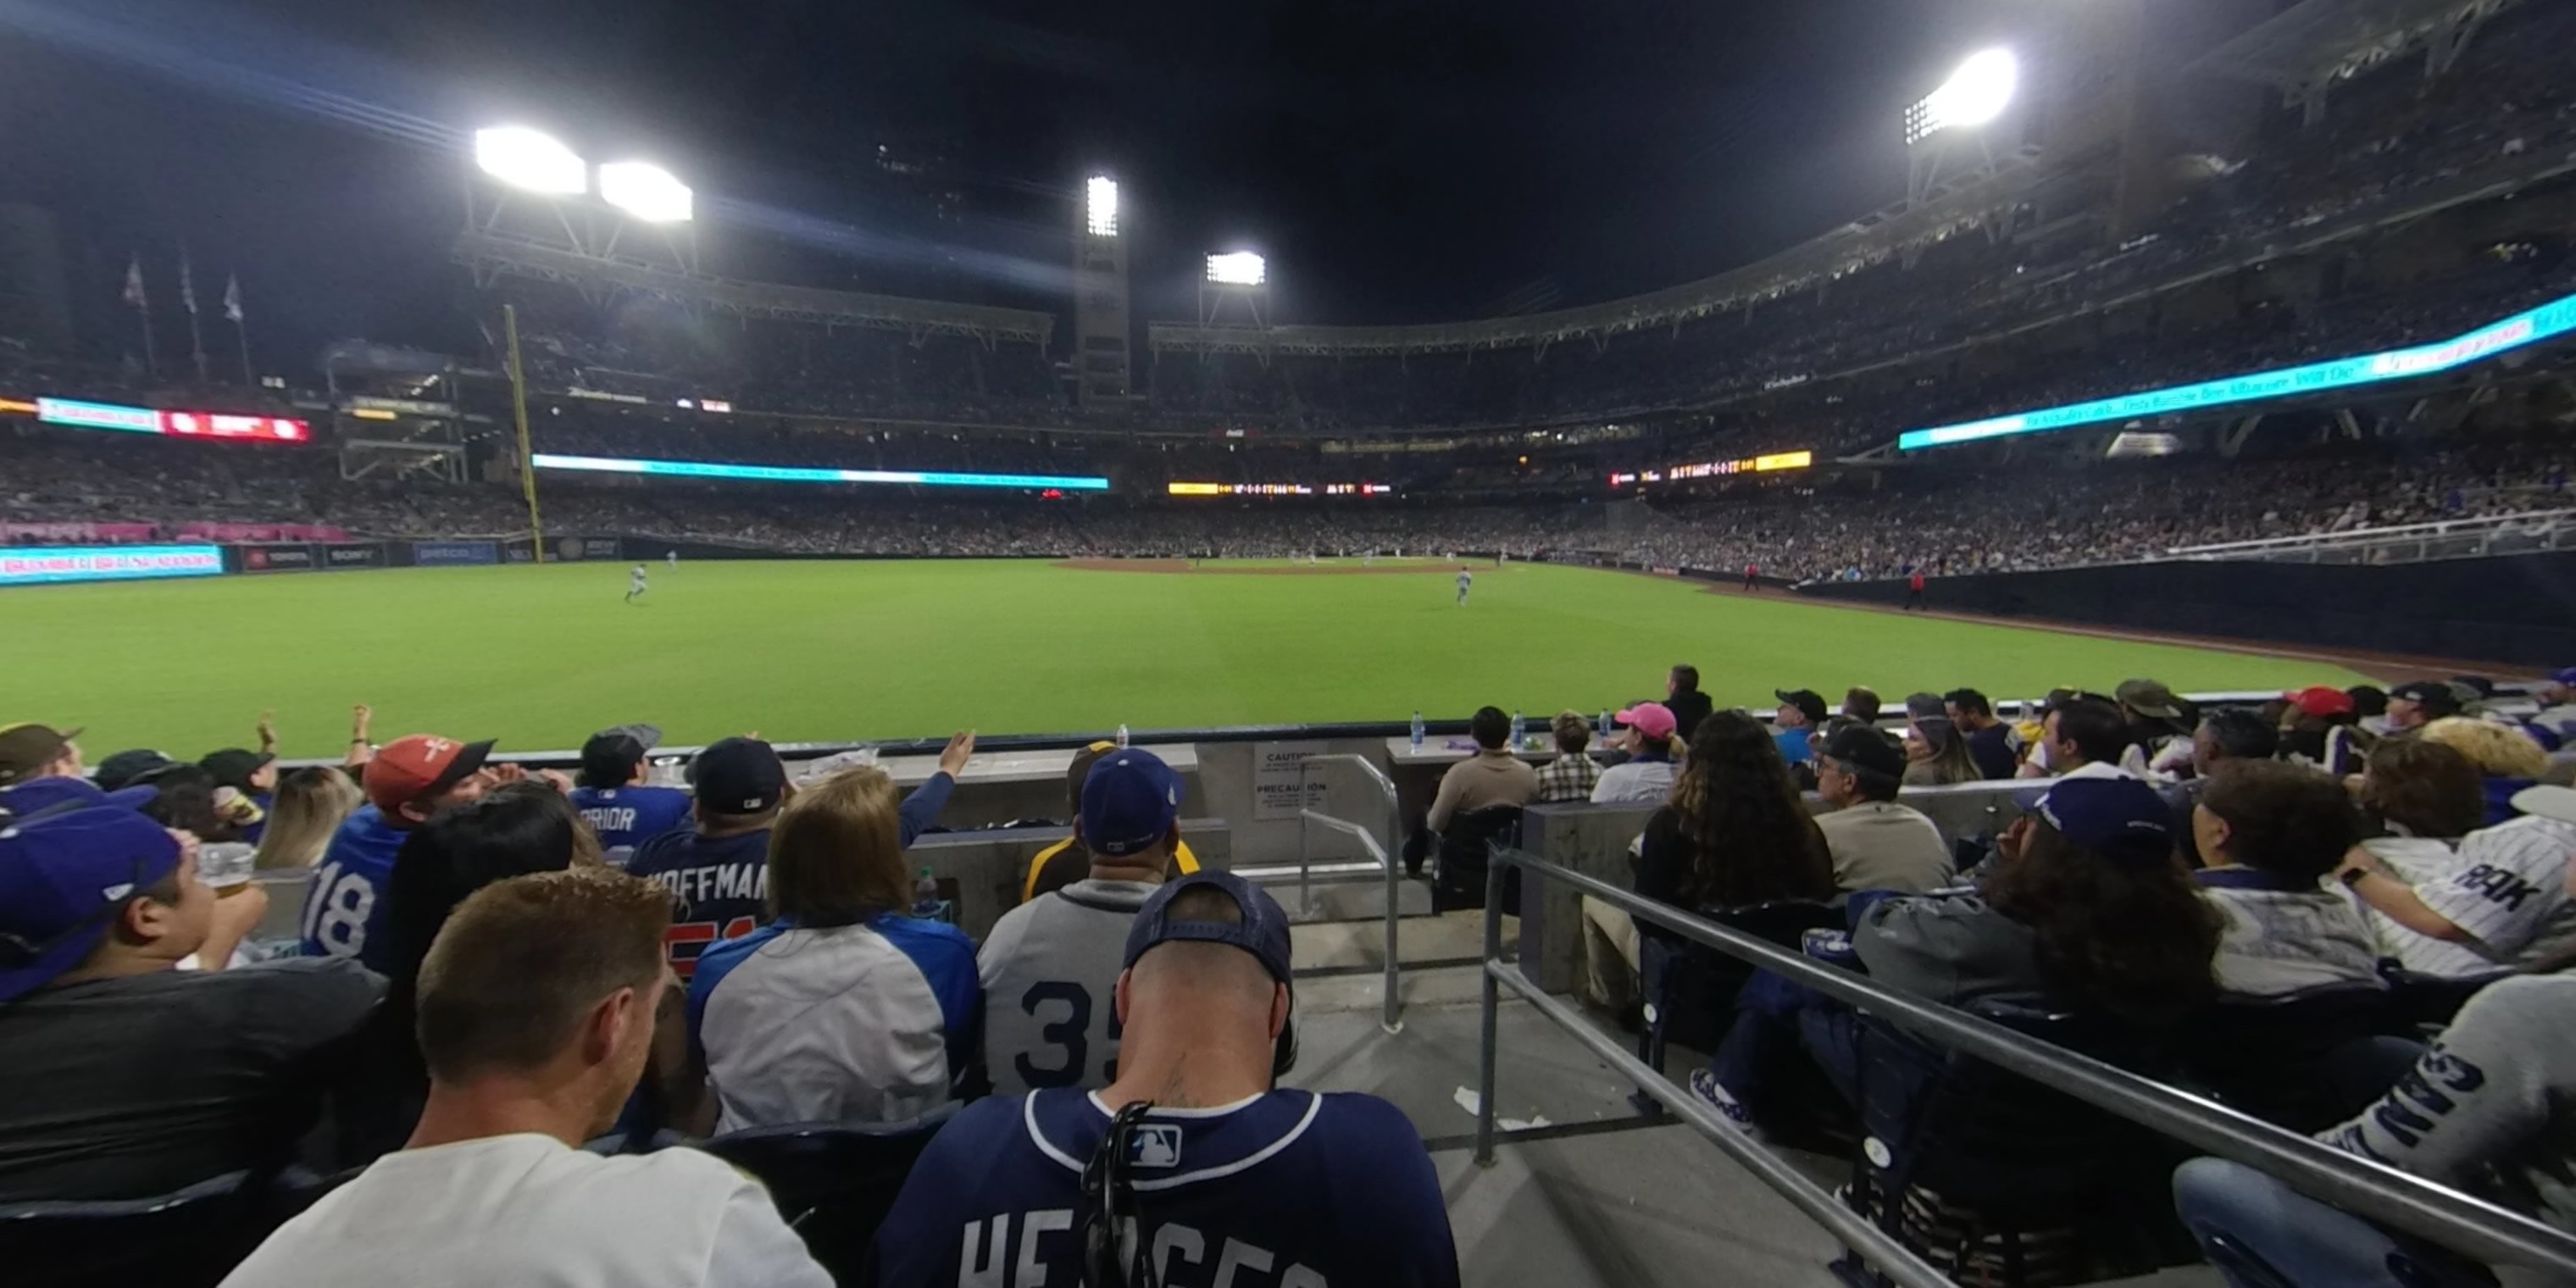 section 128 panoramic seat view  for baseball - petco park